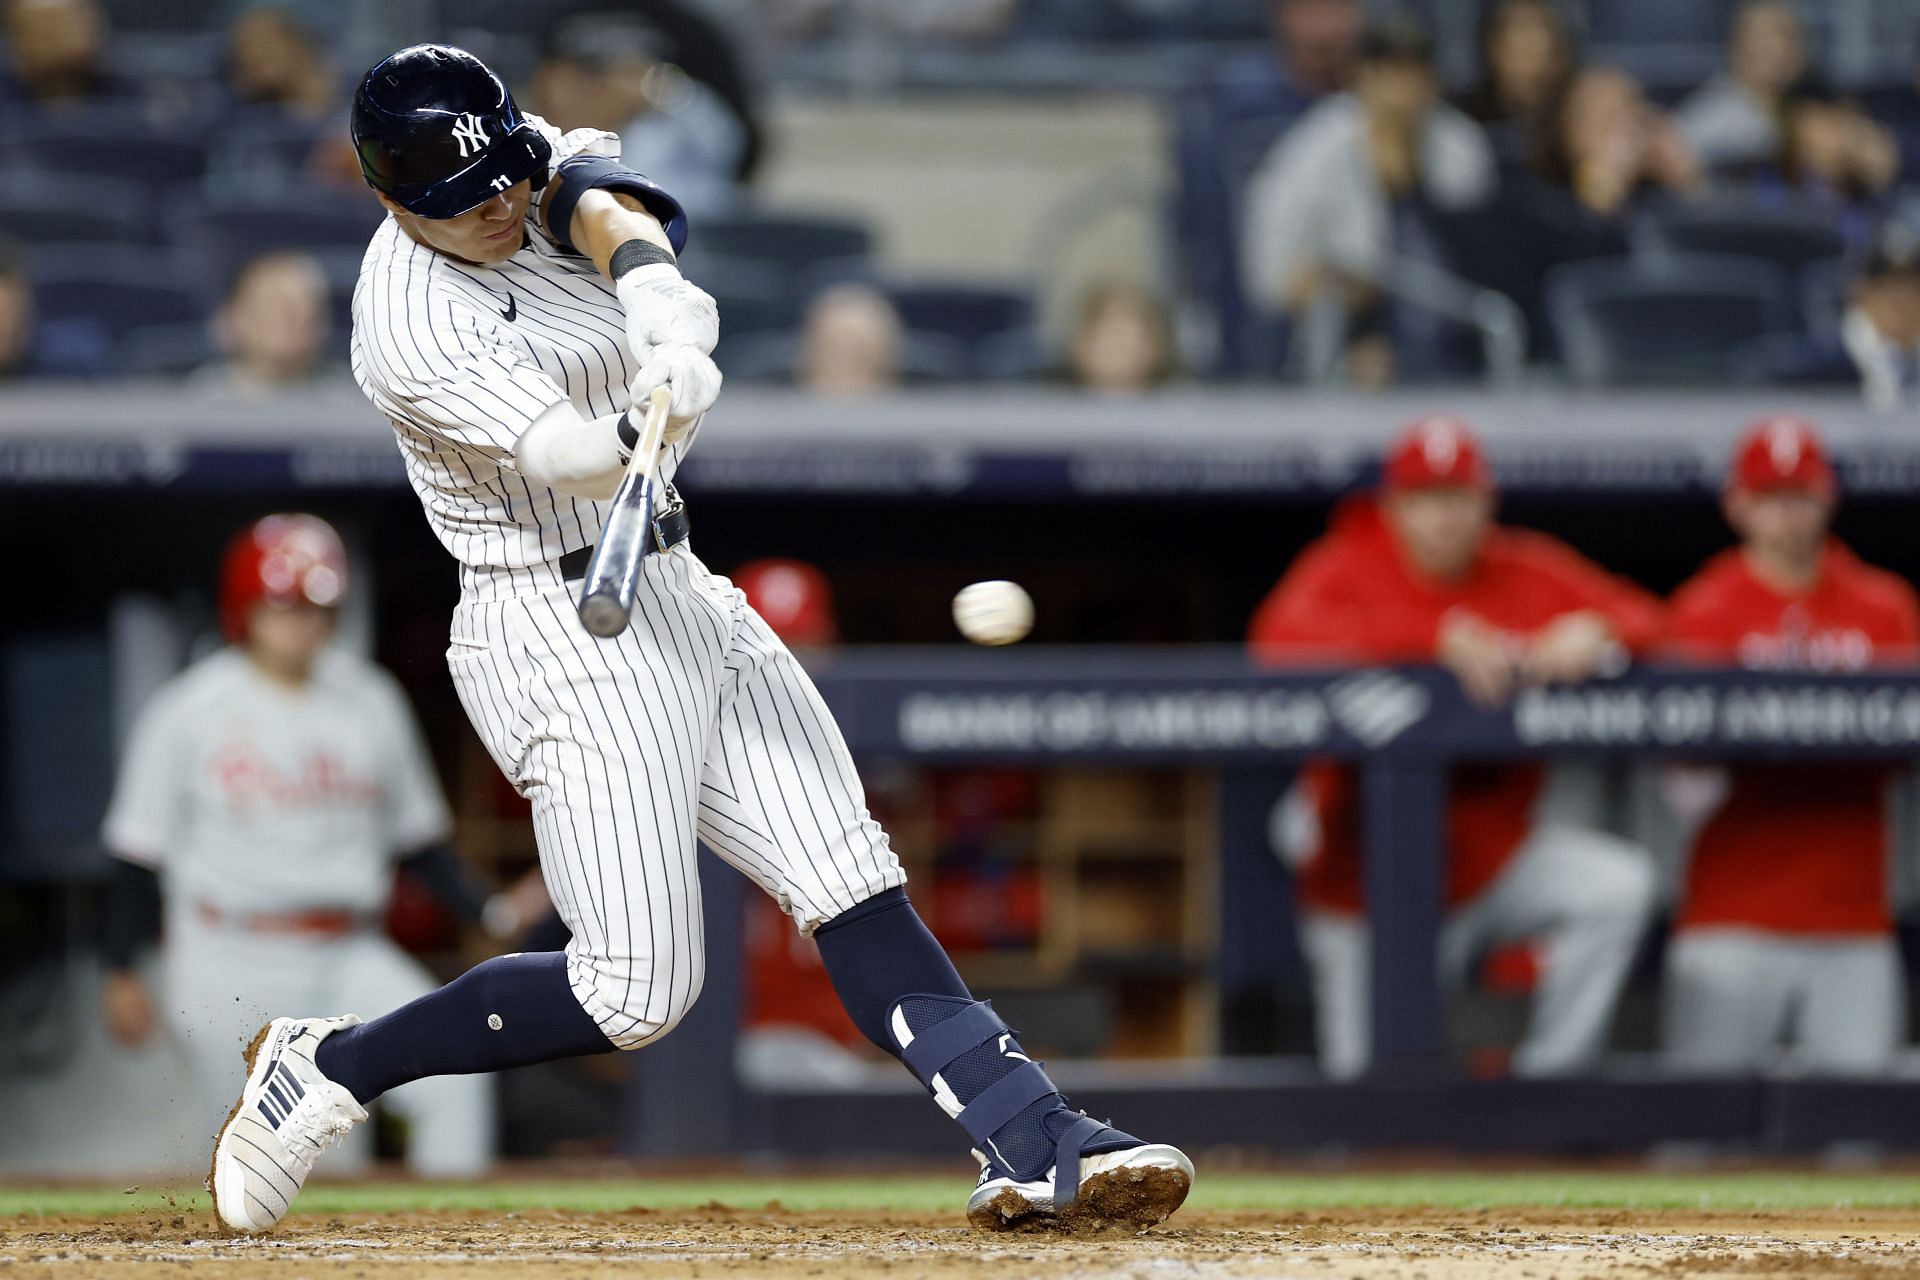 NY Yankees top prospects who could join Anthony Volpe in the Bronx